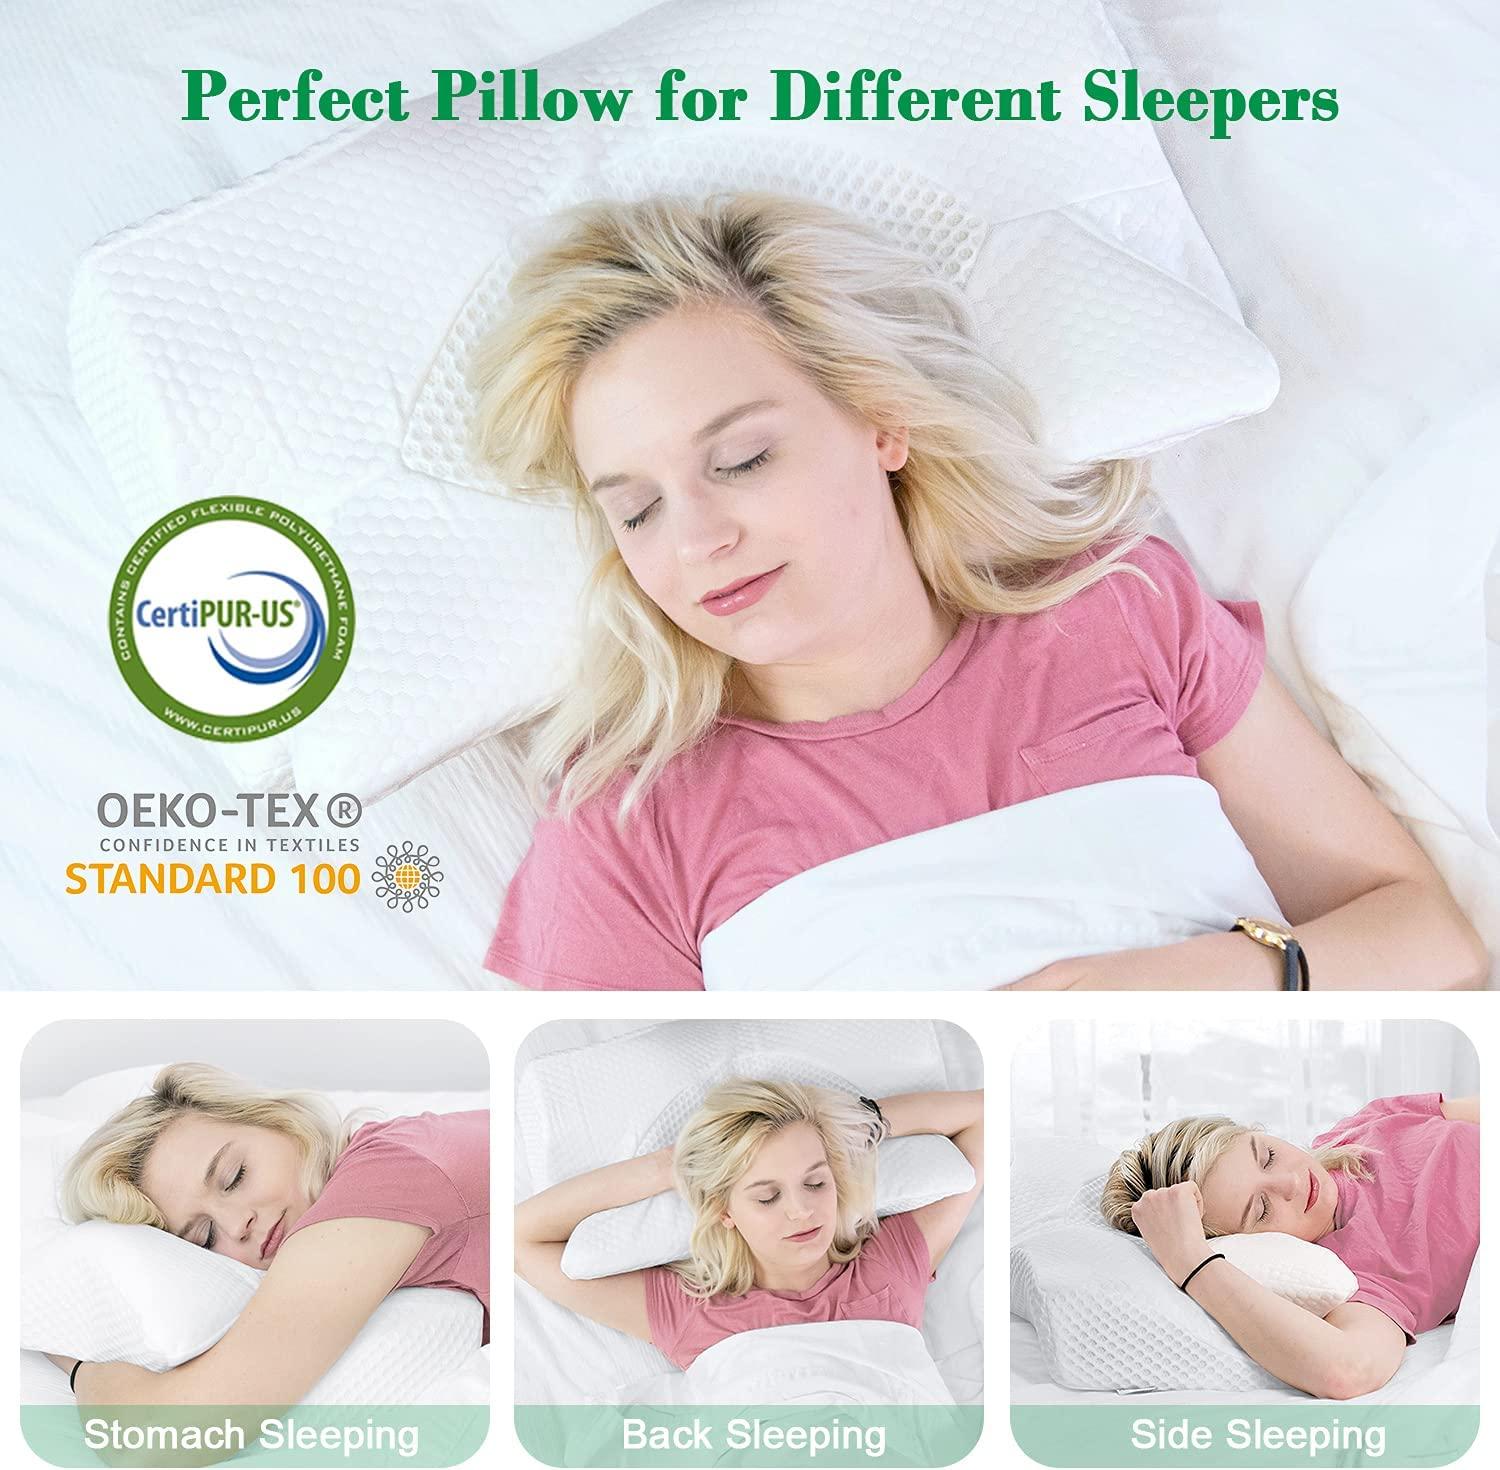 Elviros Cervical Memory Foam Pillow, Contour Pillows for Neck and Shoulder Pain, Ergonomic Orthopedic Sleeping Neck Contoured Support Pillow for